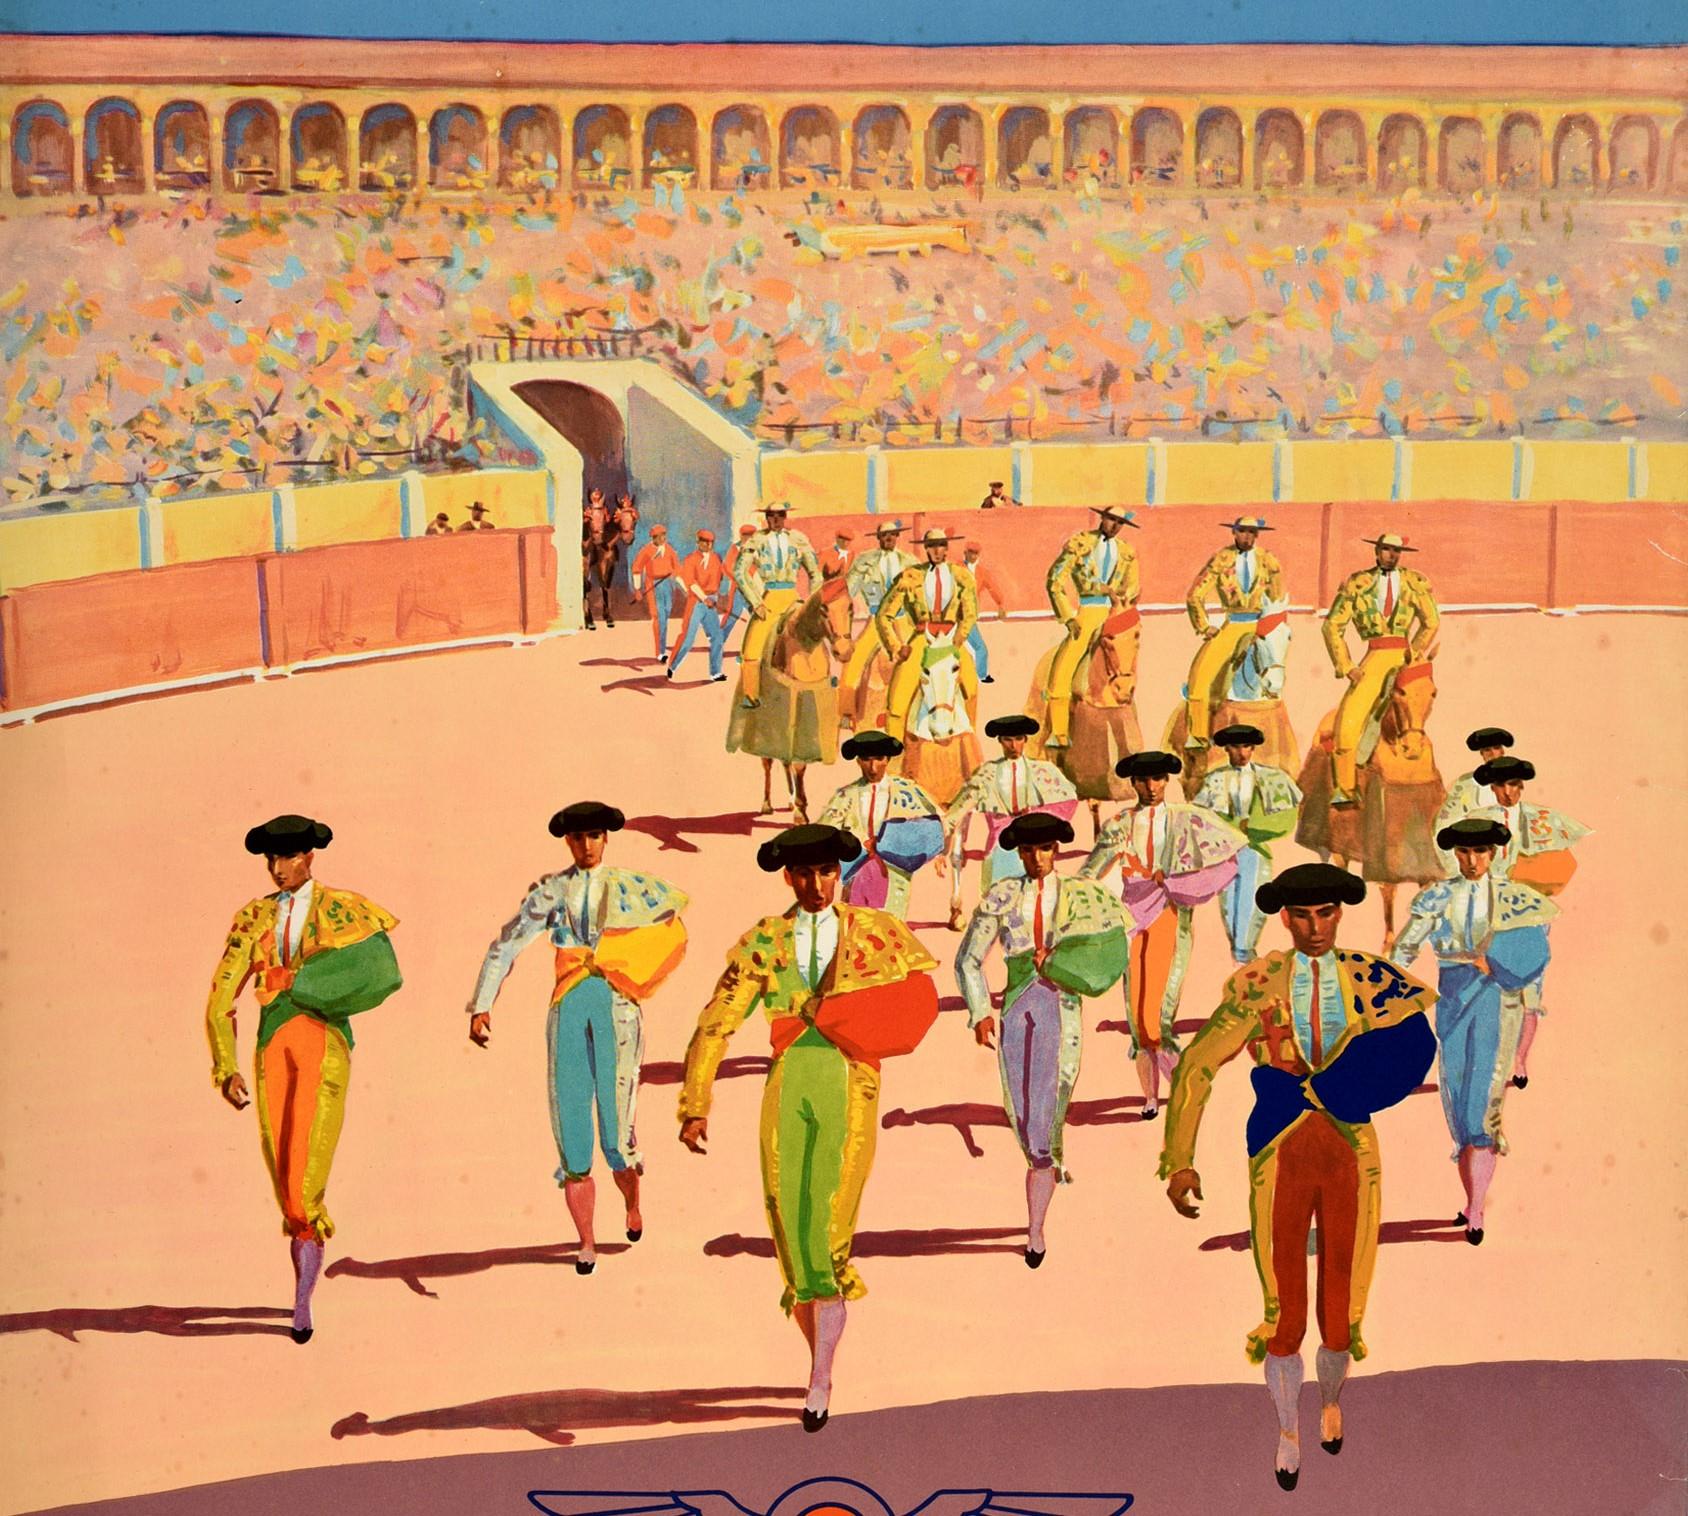 Original vintage travel poster issued by Iberia - Fiesta de Toros Spanien / Bullfighting Spain - featuring great artwork showing the toreros or bullfighters wearing traditional colourful costumes walking into a bullring arena in front of picadores